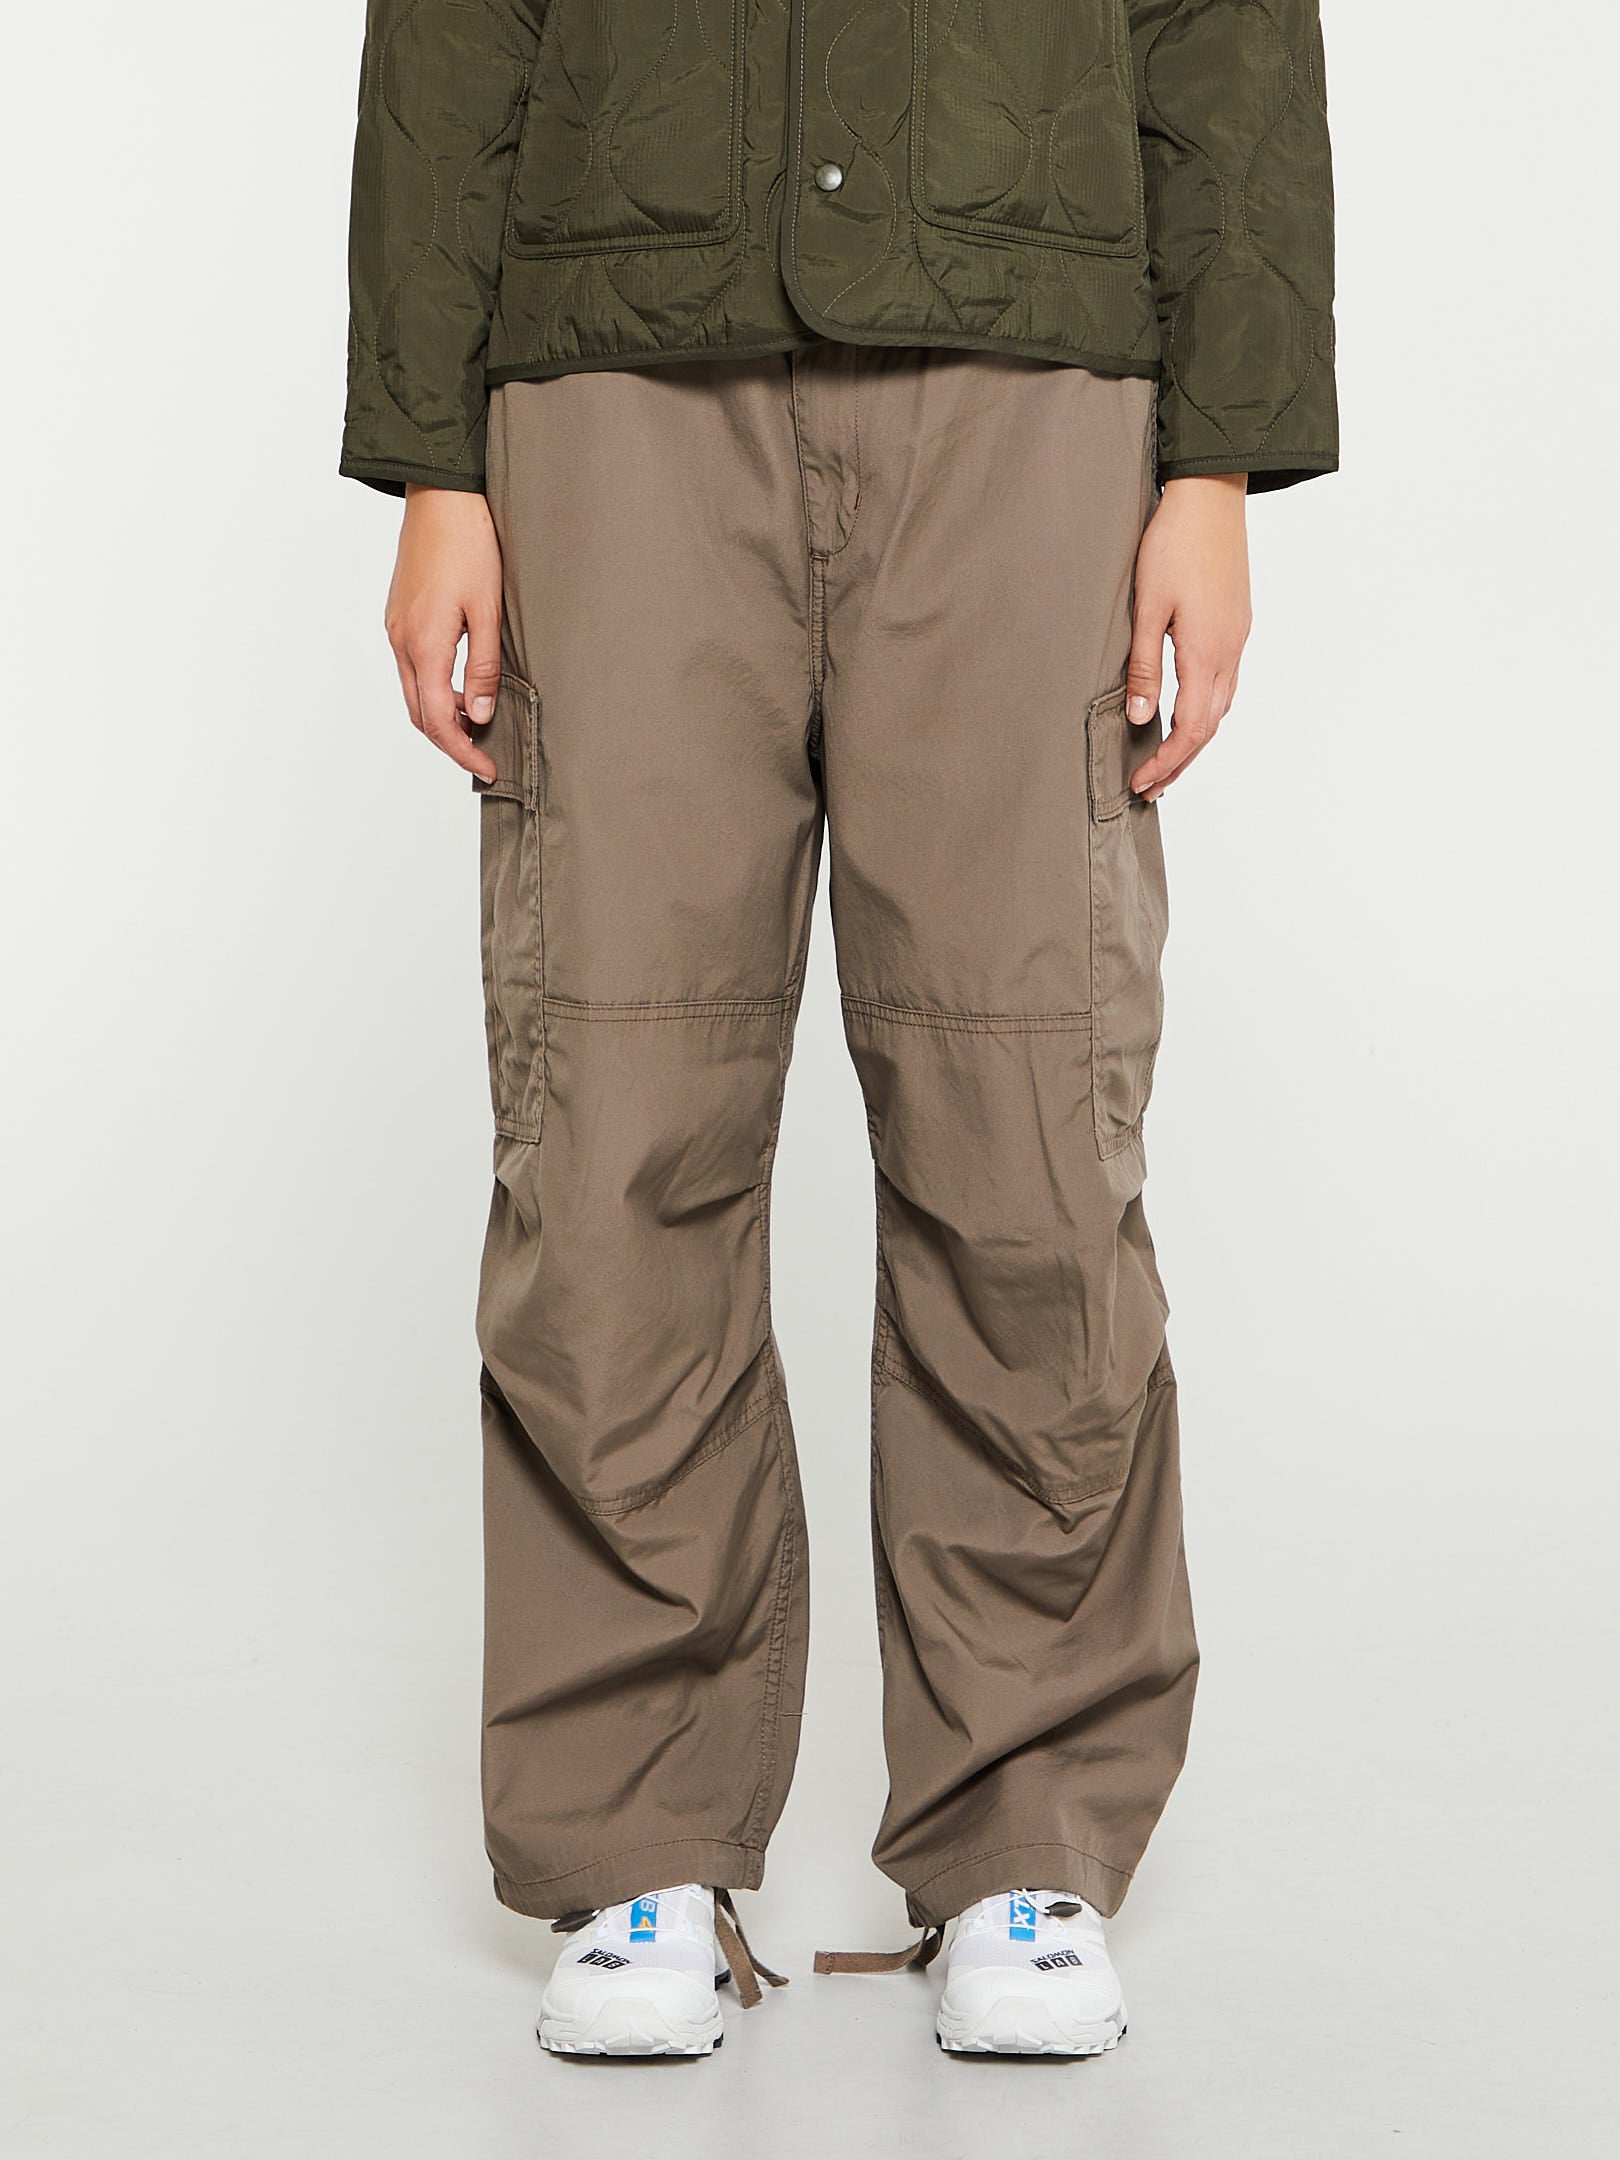 Carhartt WIP - W' Jet Cargo Pant in Barista Rinsed – stoy